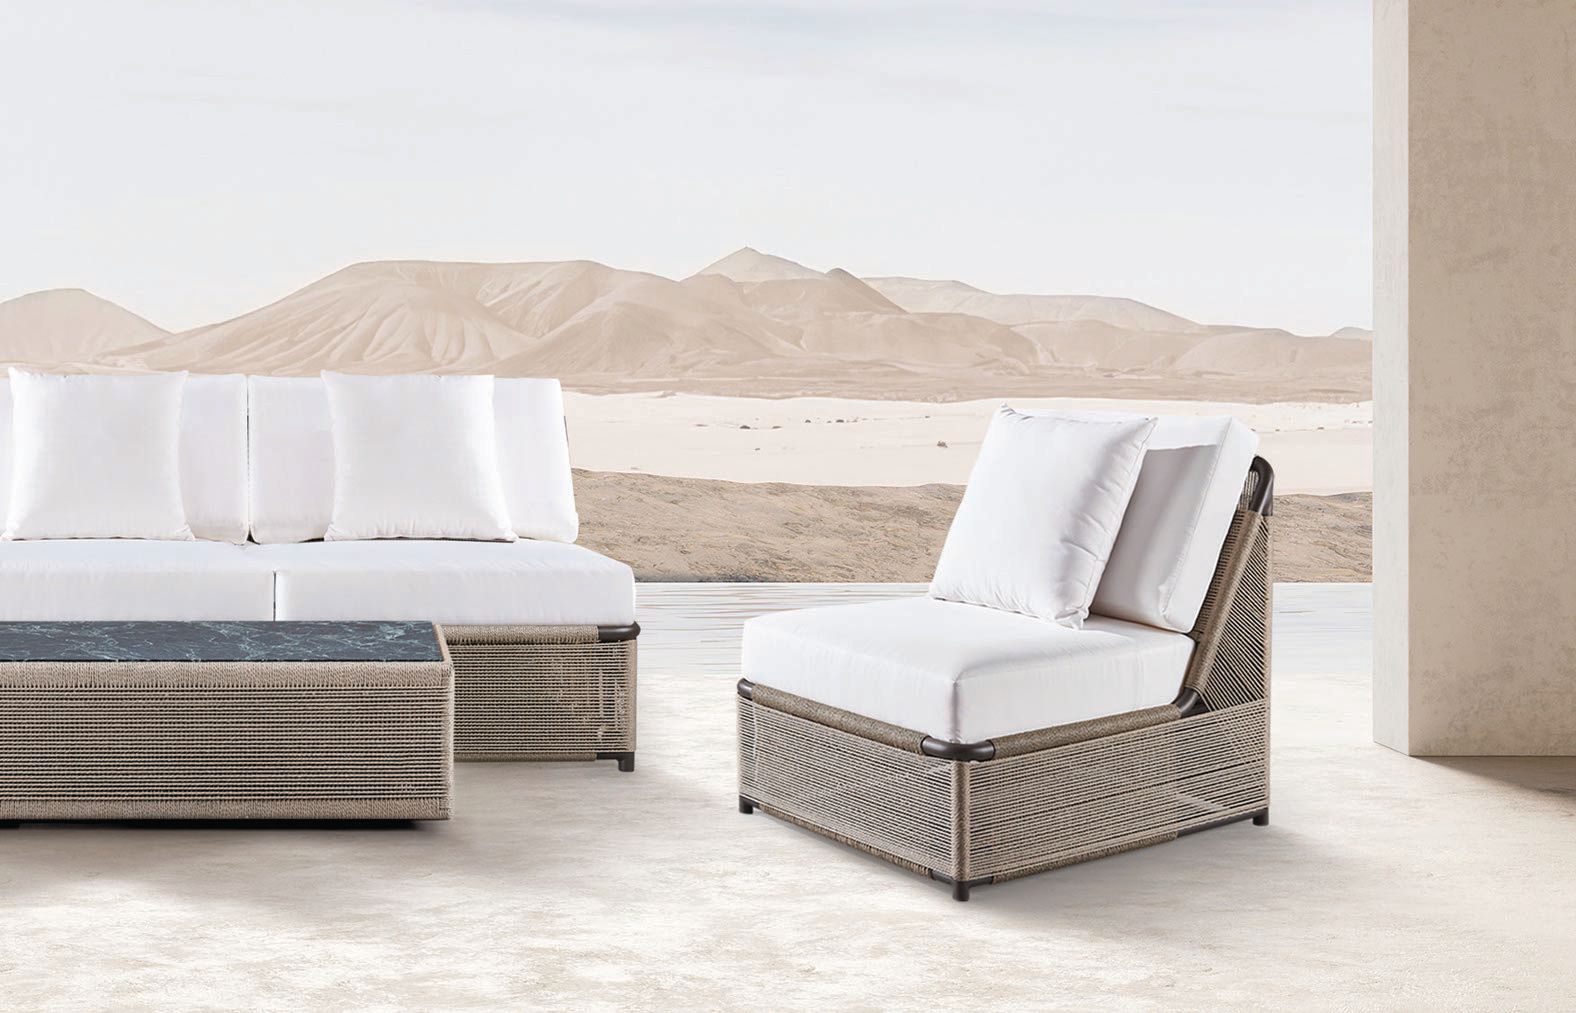 Chicago star designer Kara Mann partnered with Australian lifestyle brand Harbour resulting in a seriously chic outdoor furniture collab PHOTO COURTESY OF HARBOUR